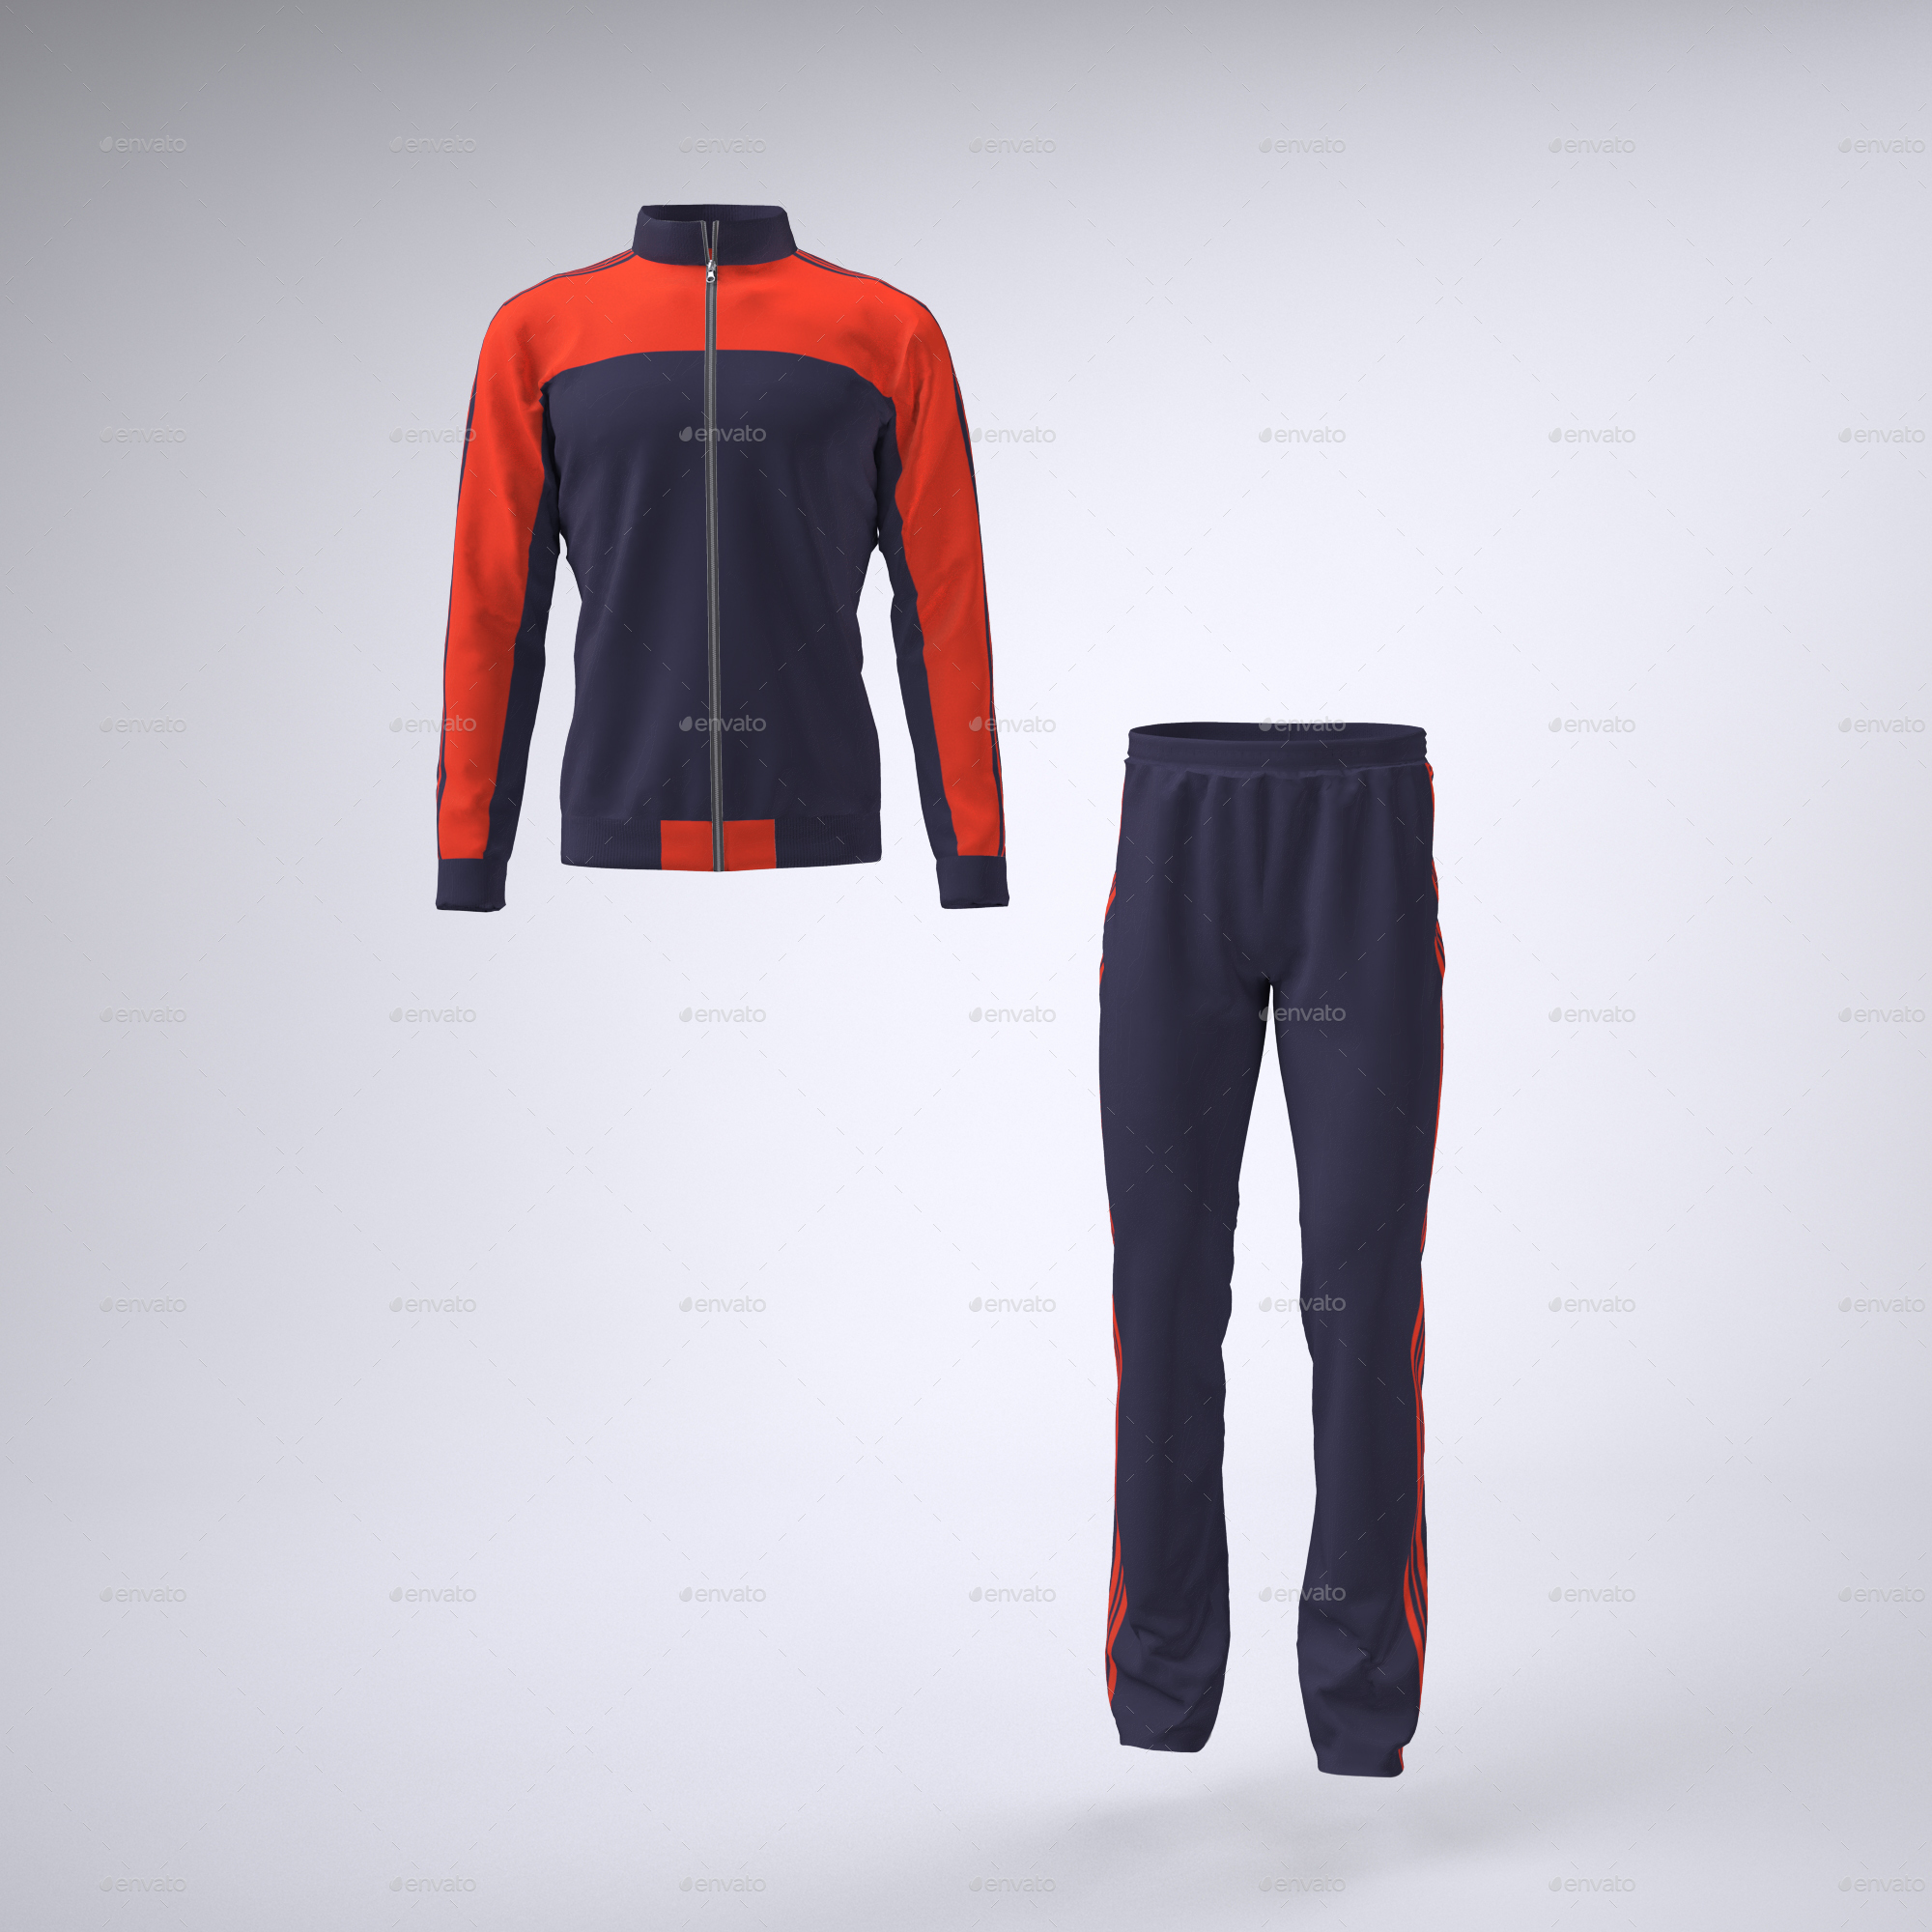 Download Tracksuit Jacket and Bottoms Mock-up by Sanchi477 ...